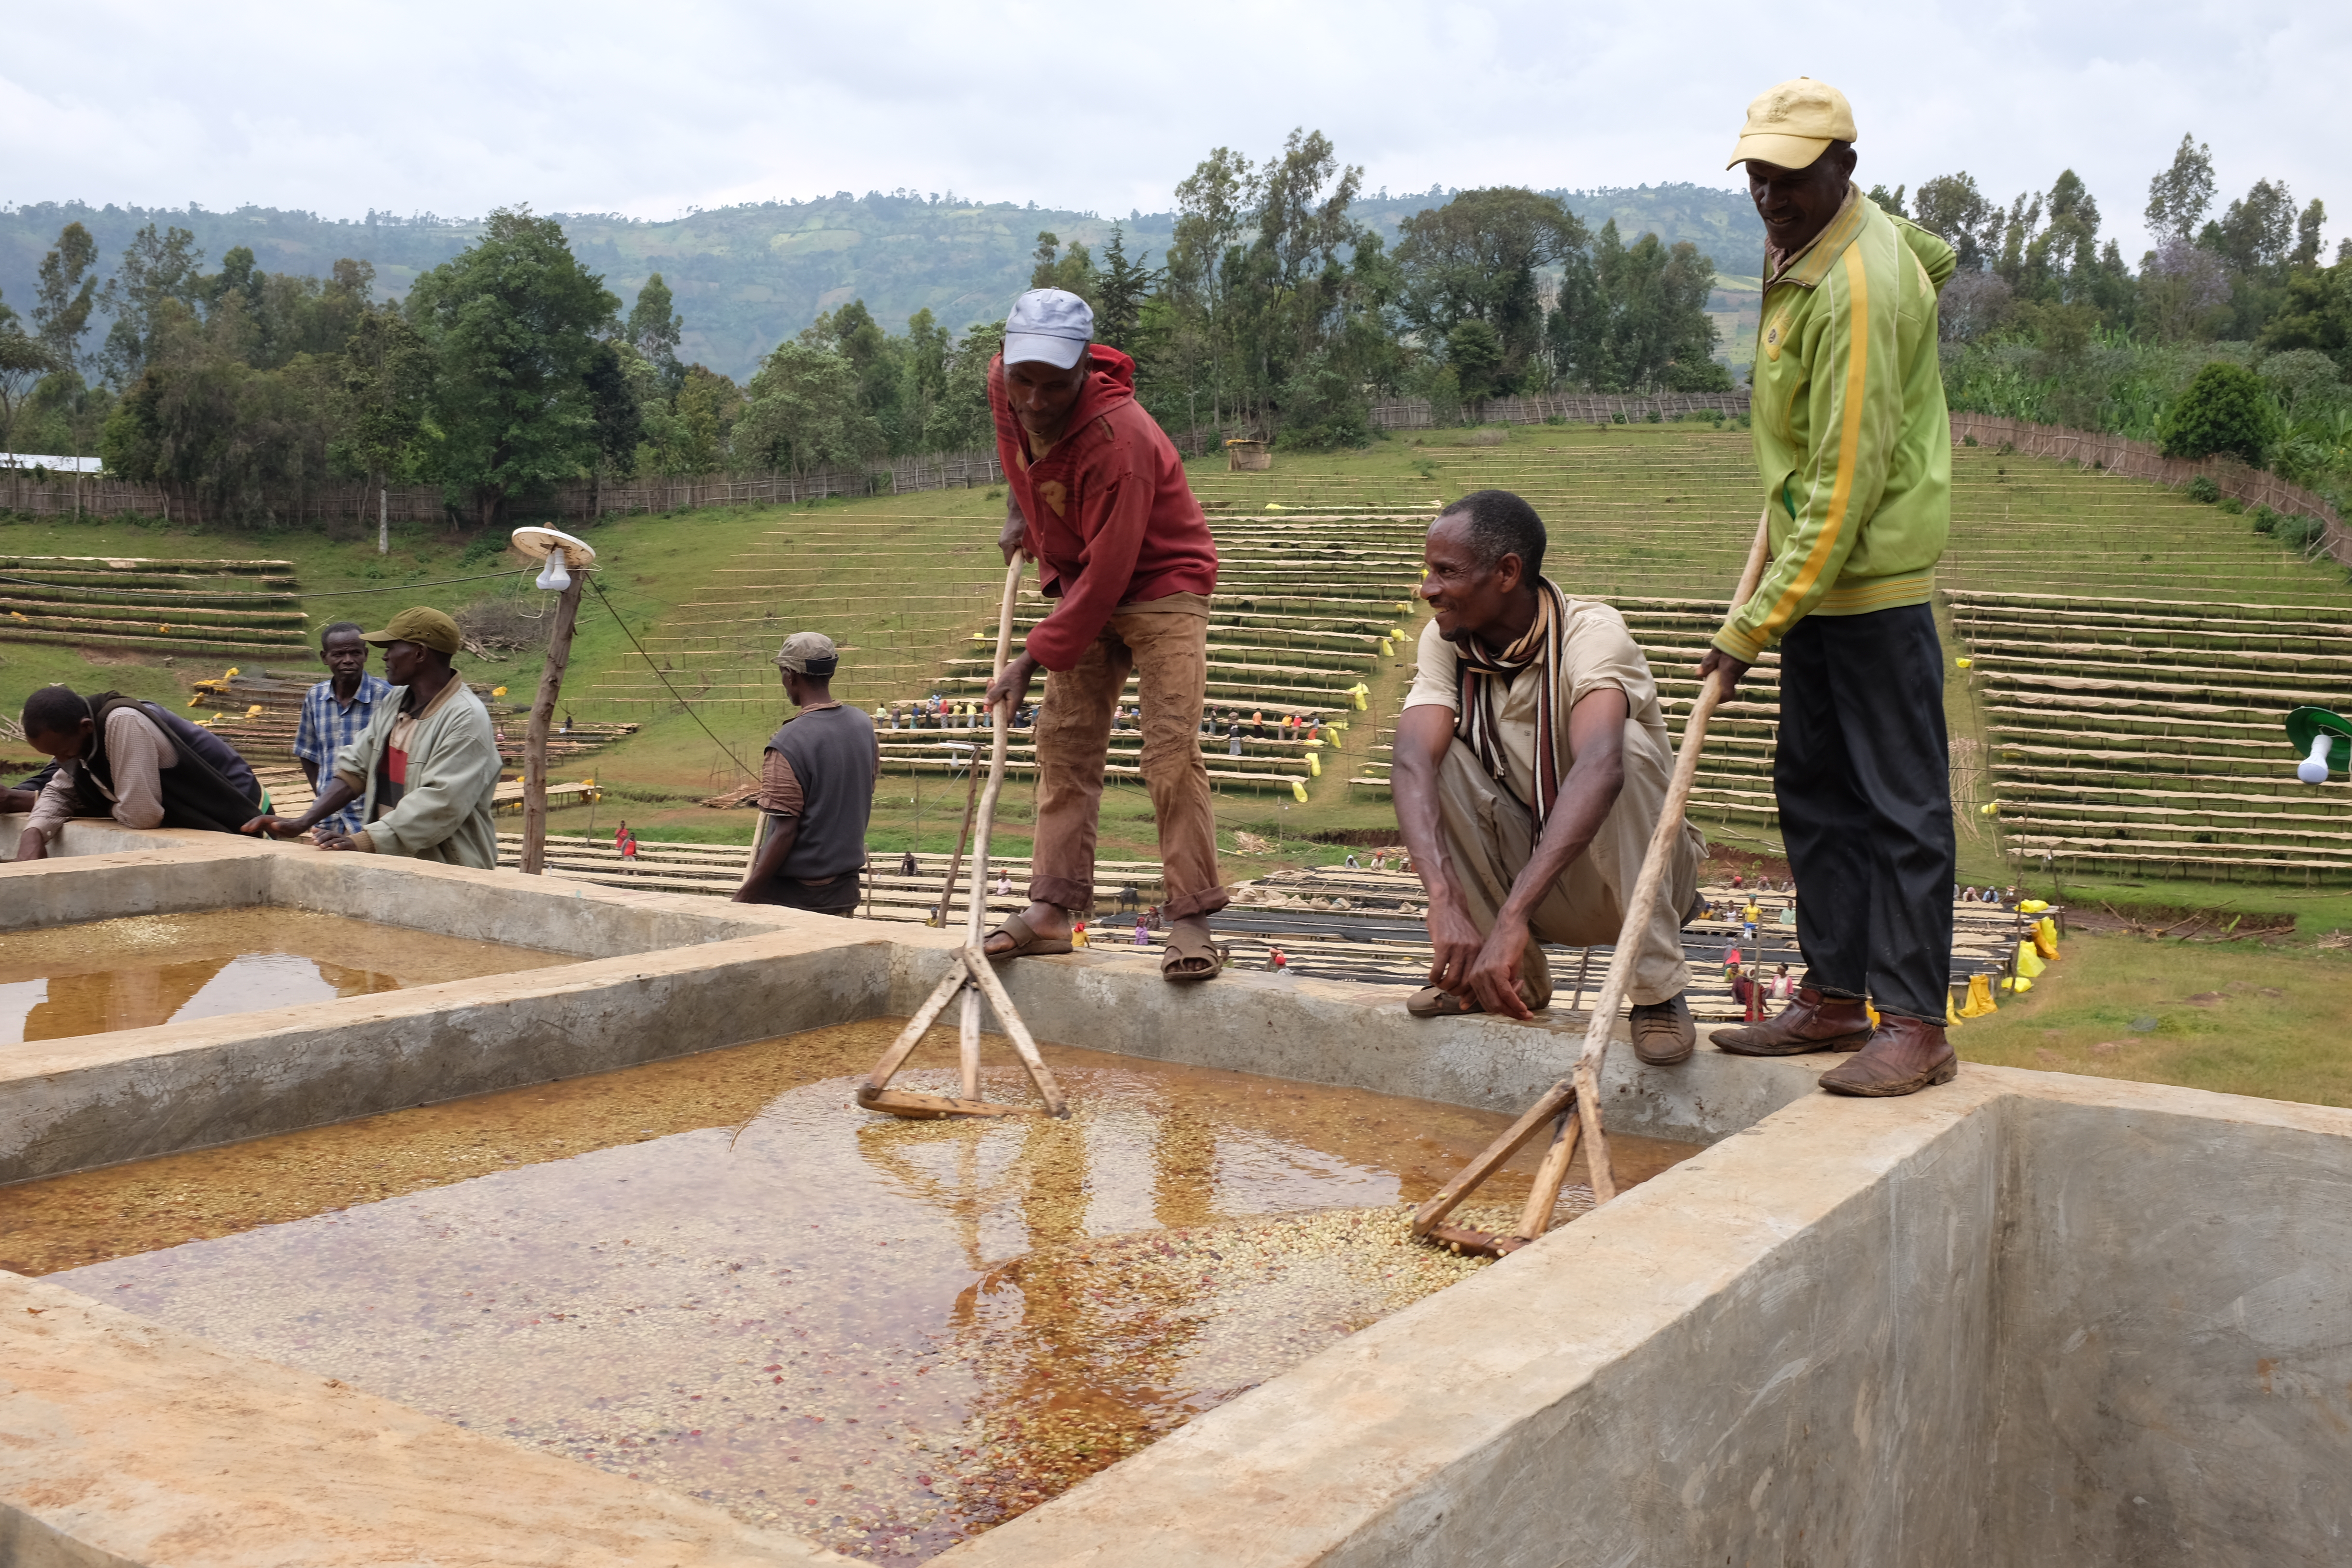 Workers at Qonqona mill in Sidama, Ethiopia, using wooden rakes to scrub coffee in washing channels and tanks.